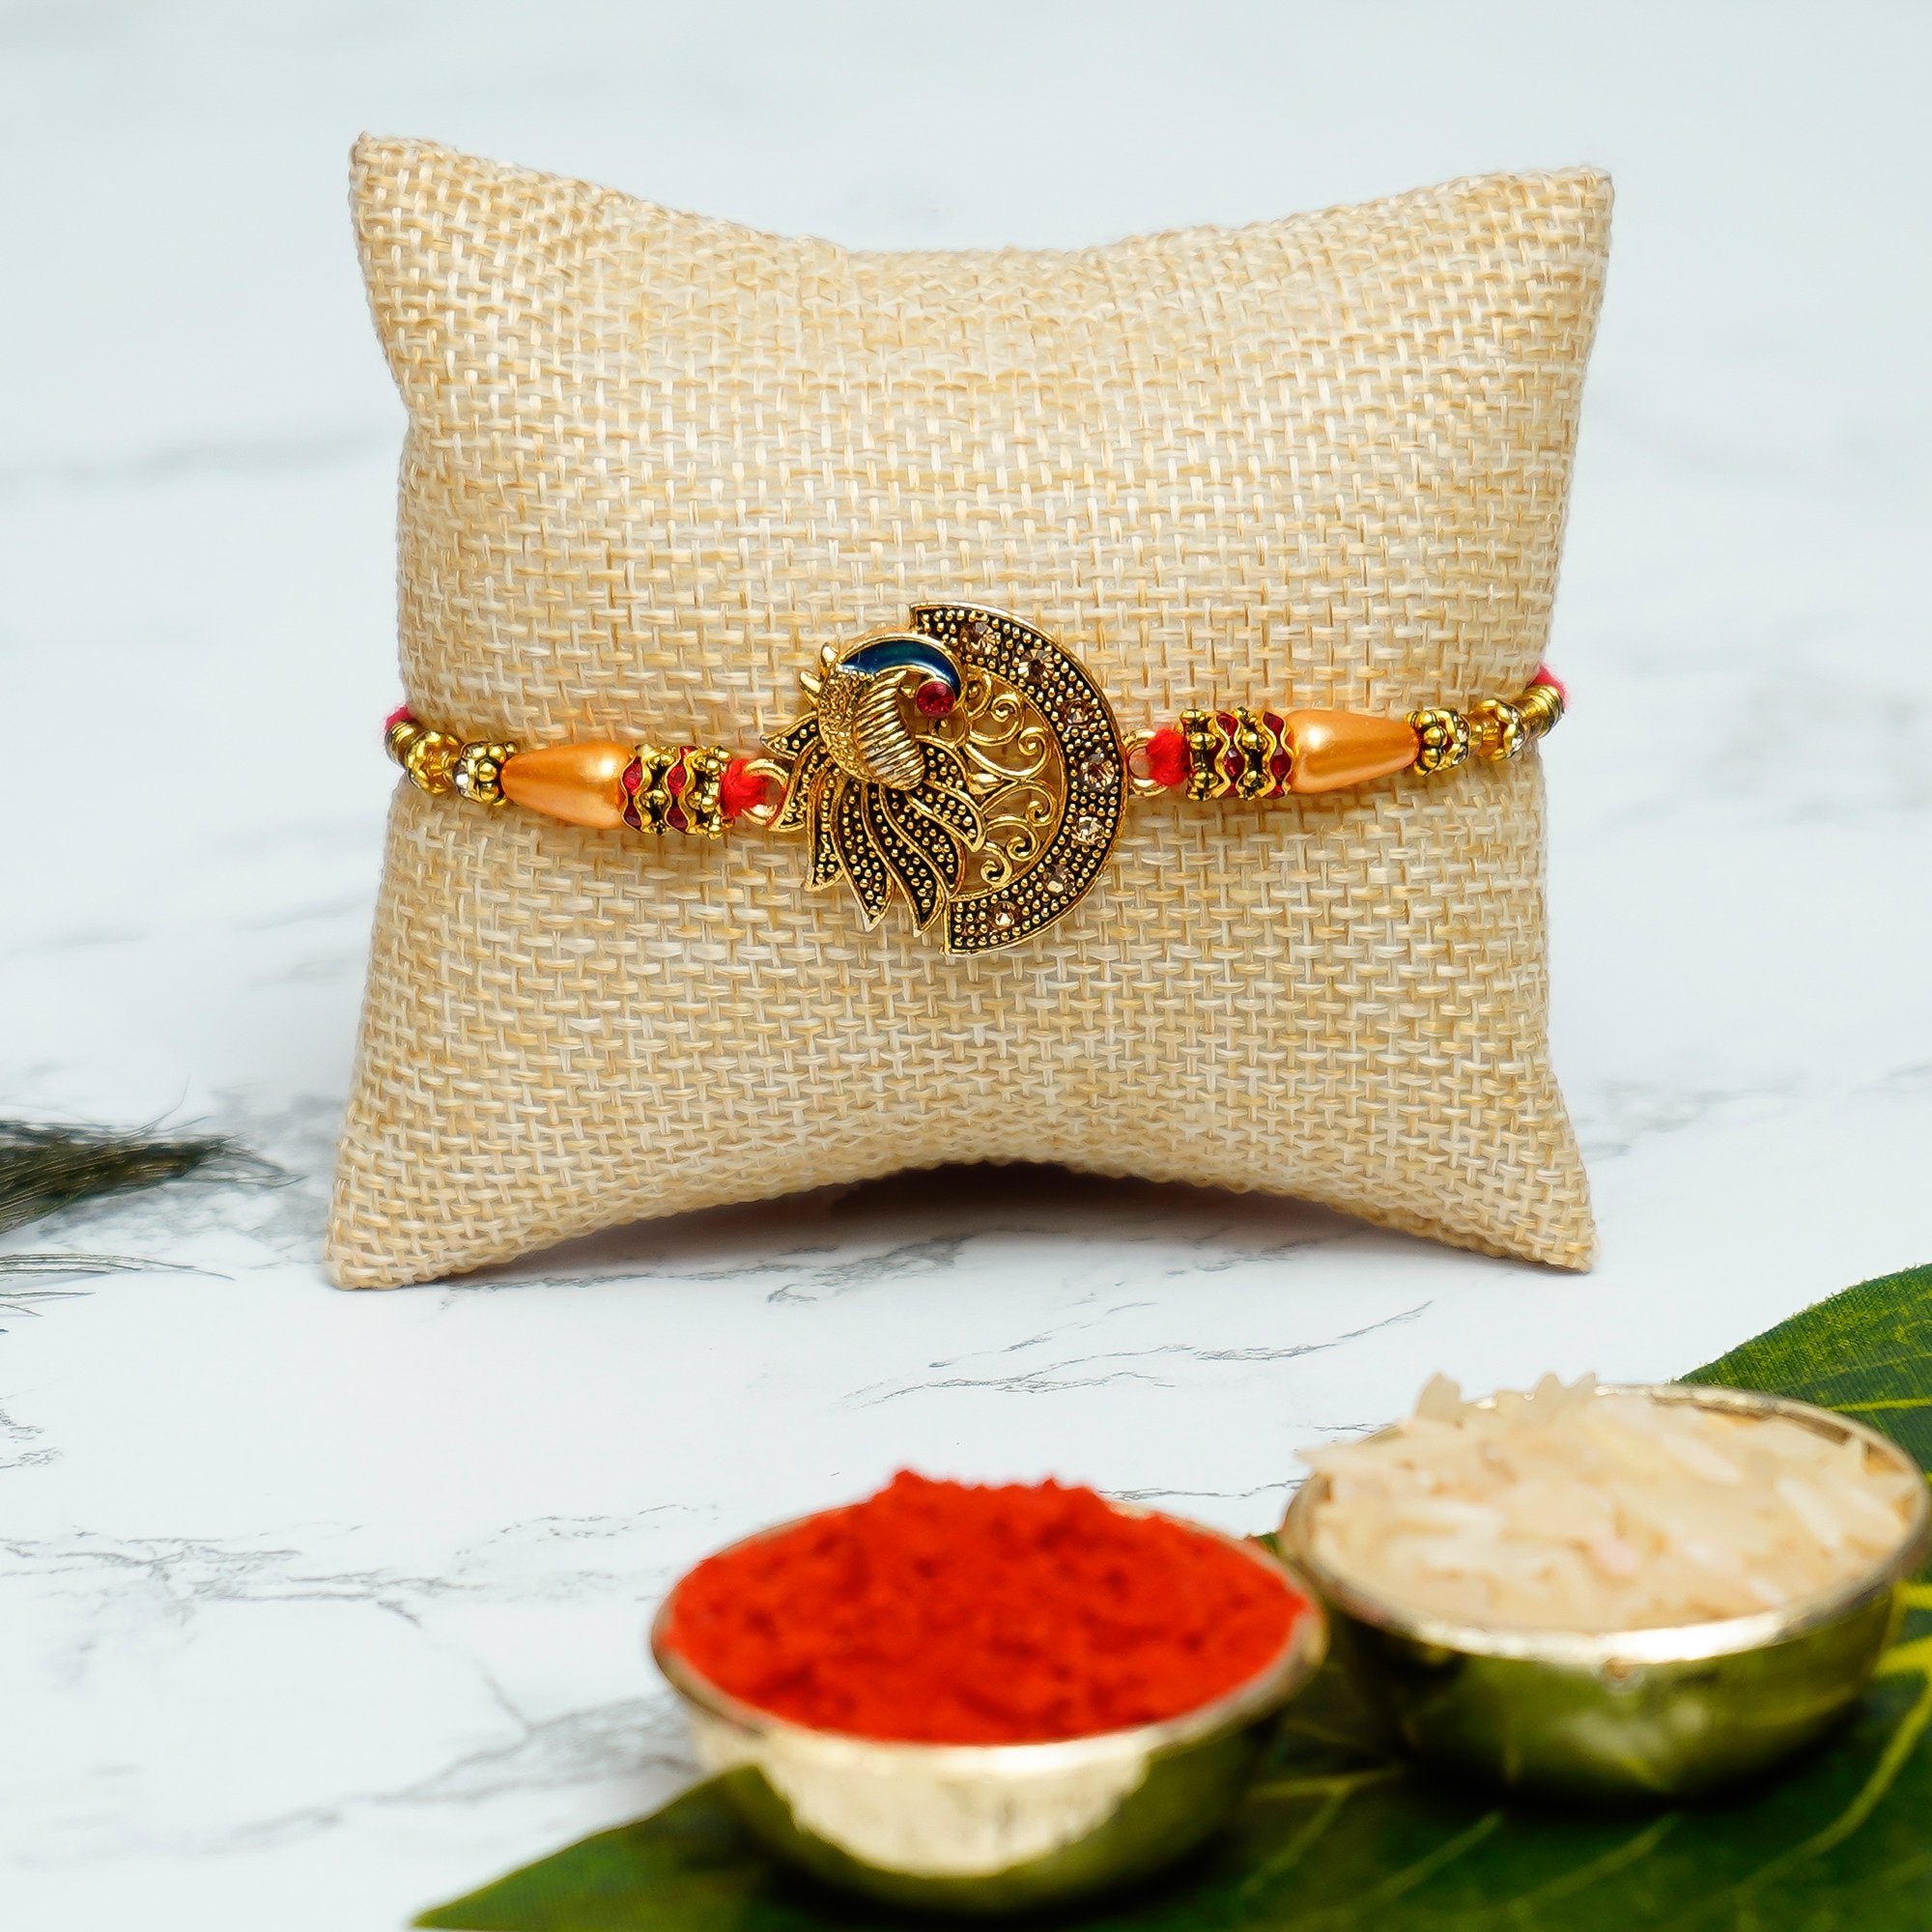 Designer Peacock Rakhi with Praying Red Monk Buddha with Wooden Base, Fragranced Petals and Tealight and Roli Chawal Pack, Best Wishes Greeting Card 1